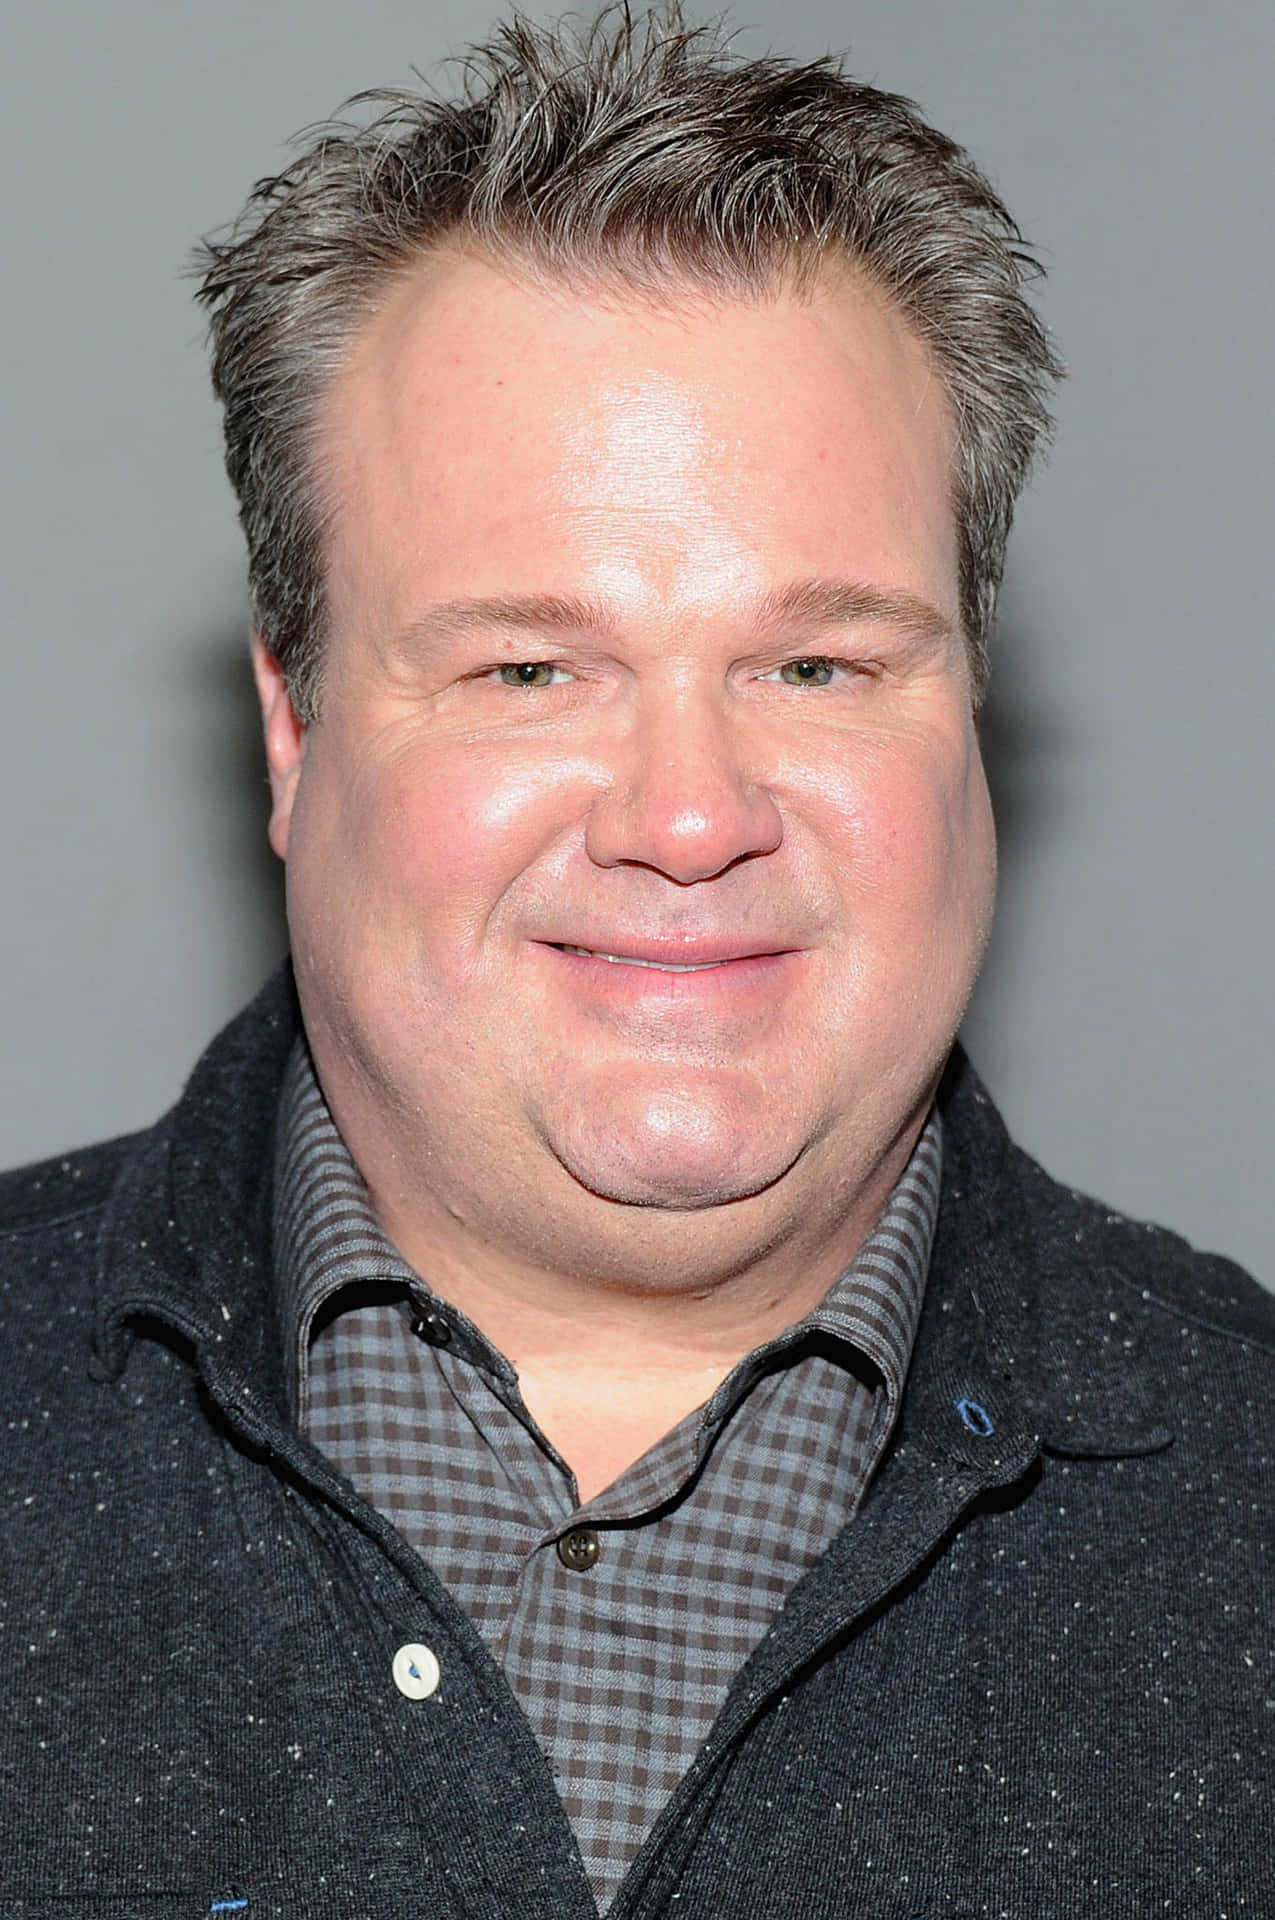 Ericstonestreet Is An American Actor Known For His Role As Cameron Tucker In The Television Sitcom 